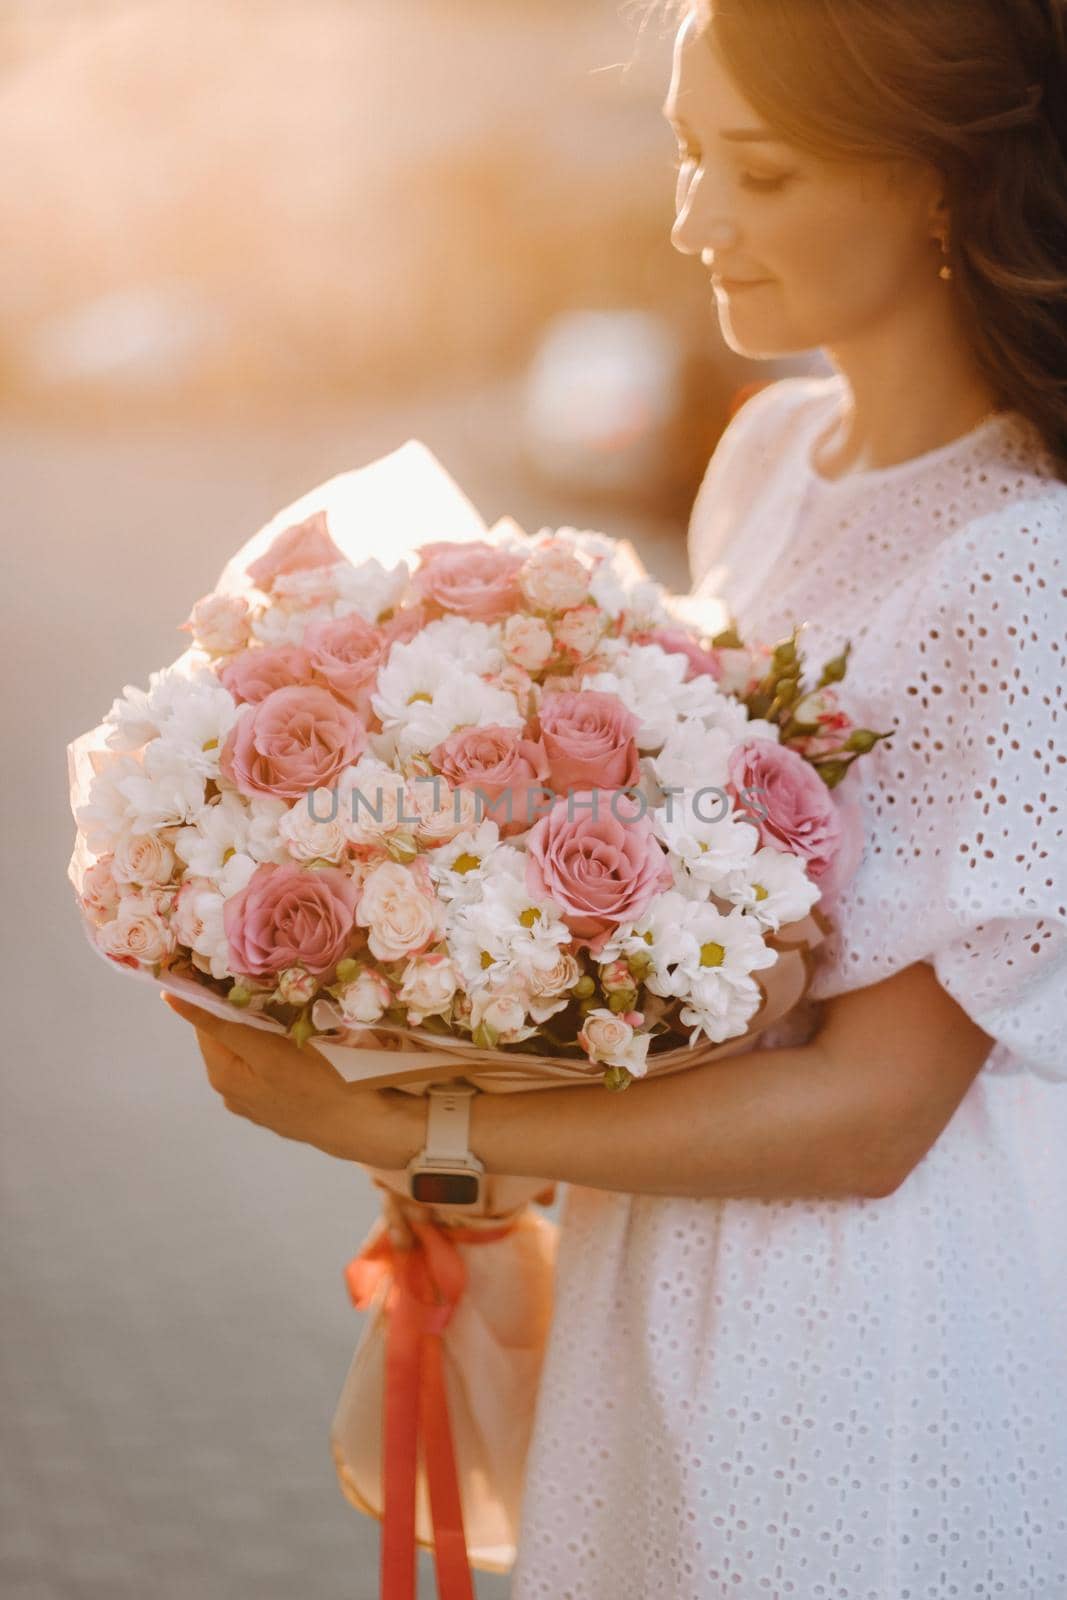 A happy woman in a white dress at sunset with a bouquet of flowers in the city by Lobachad